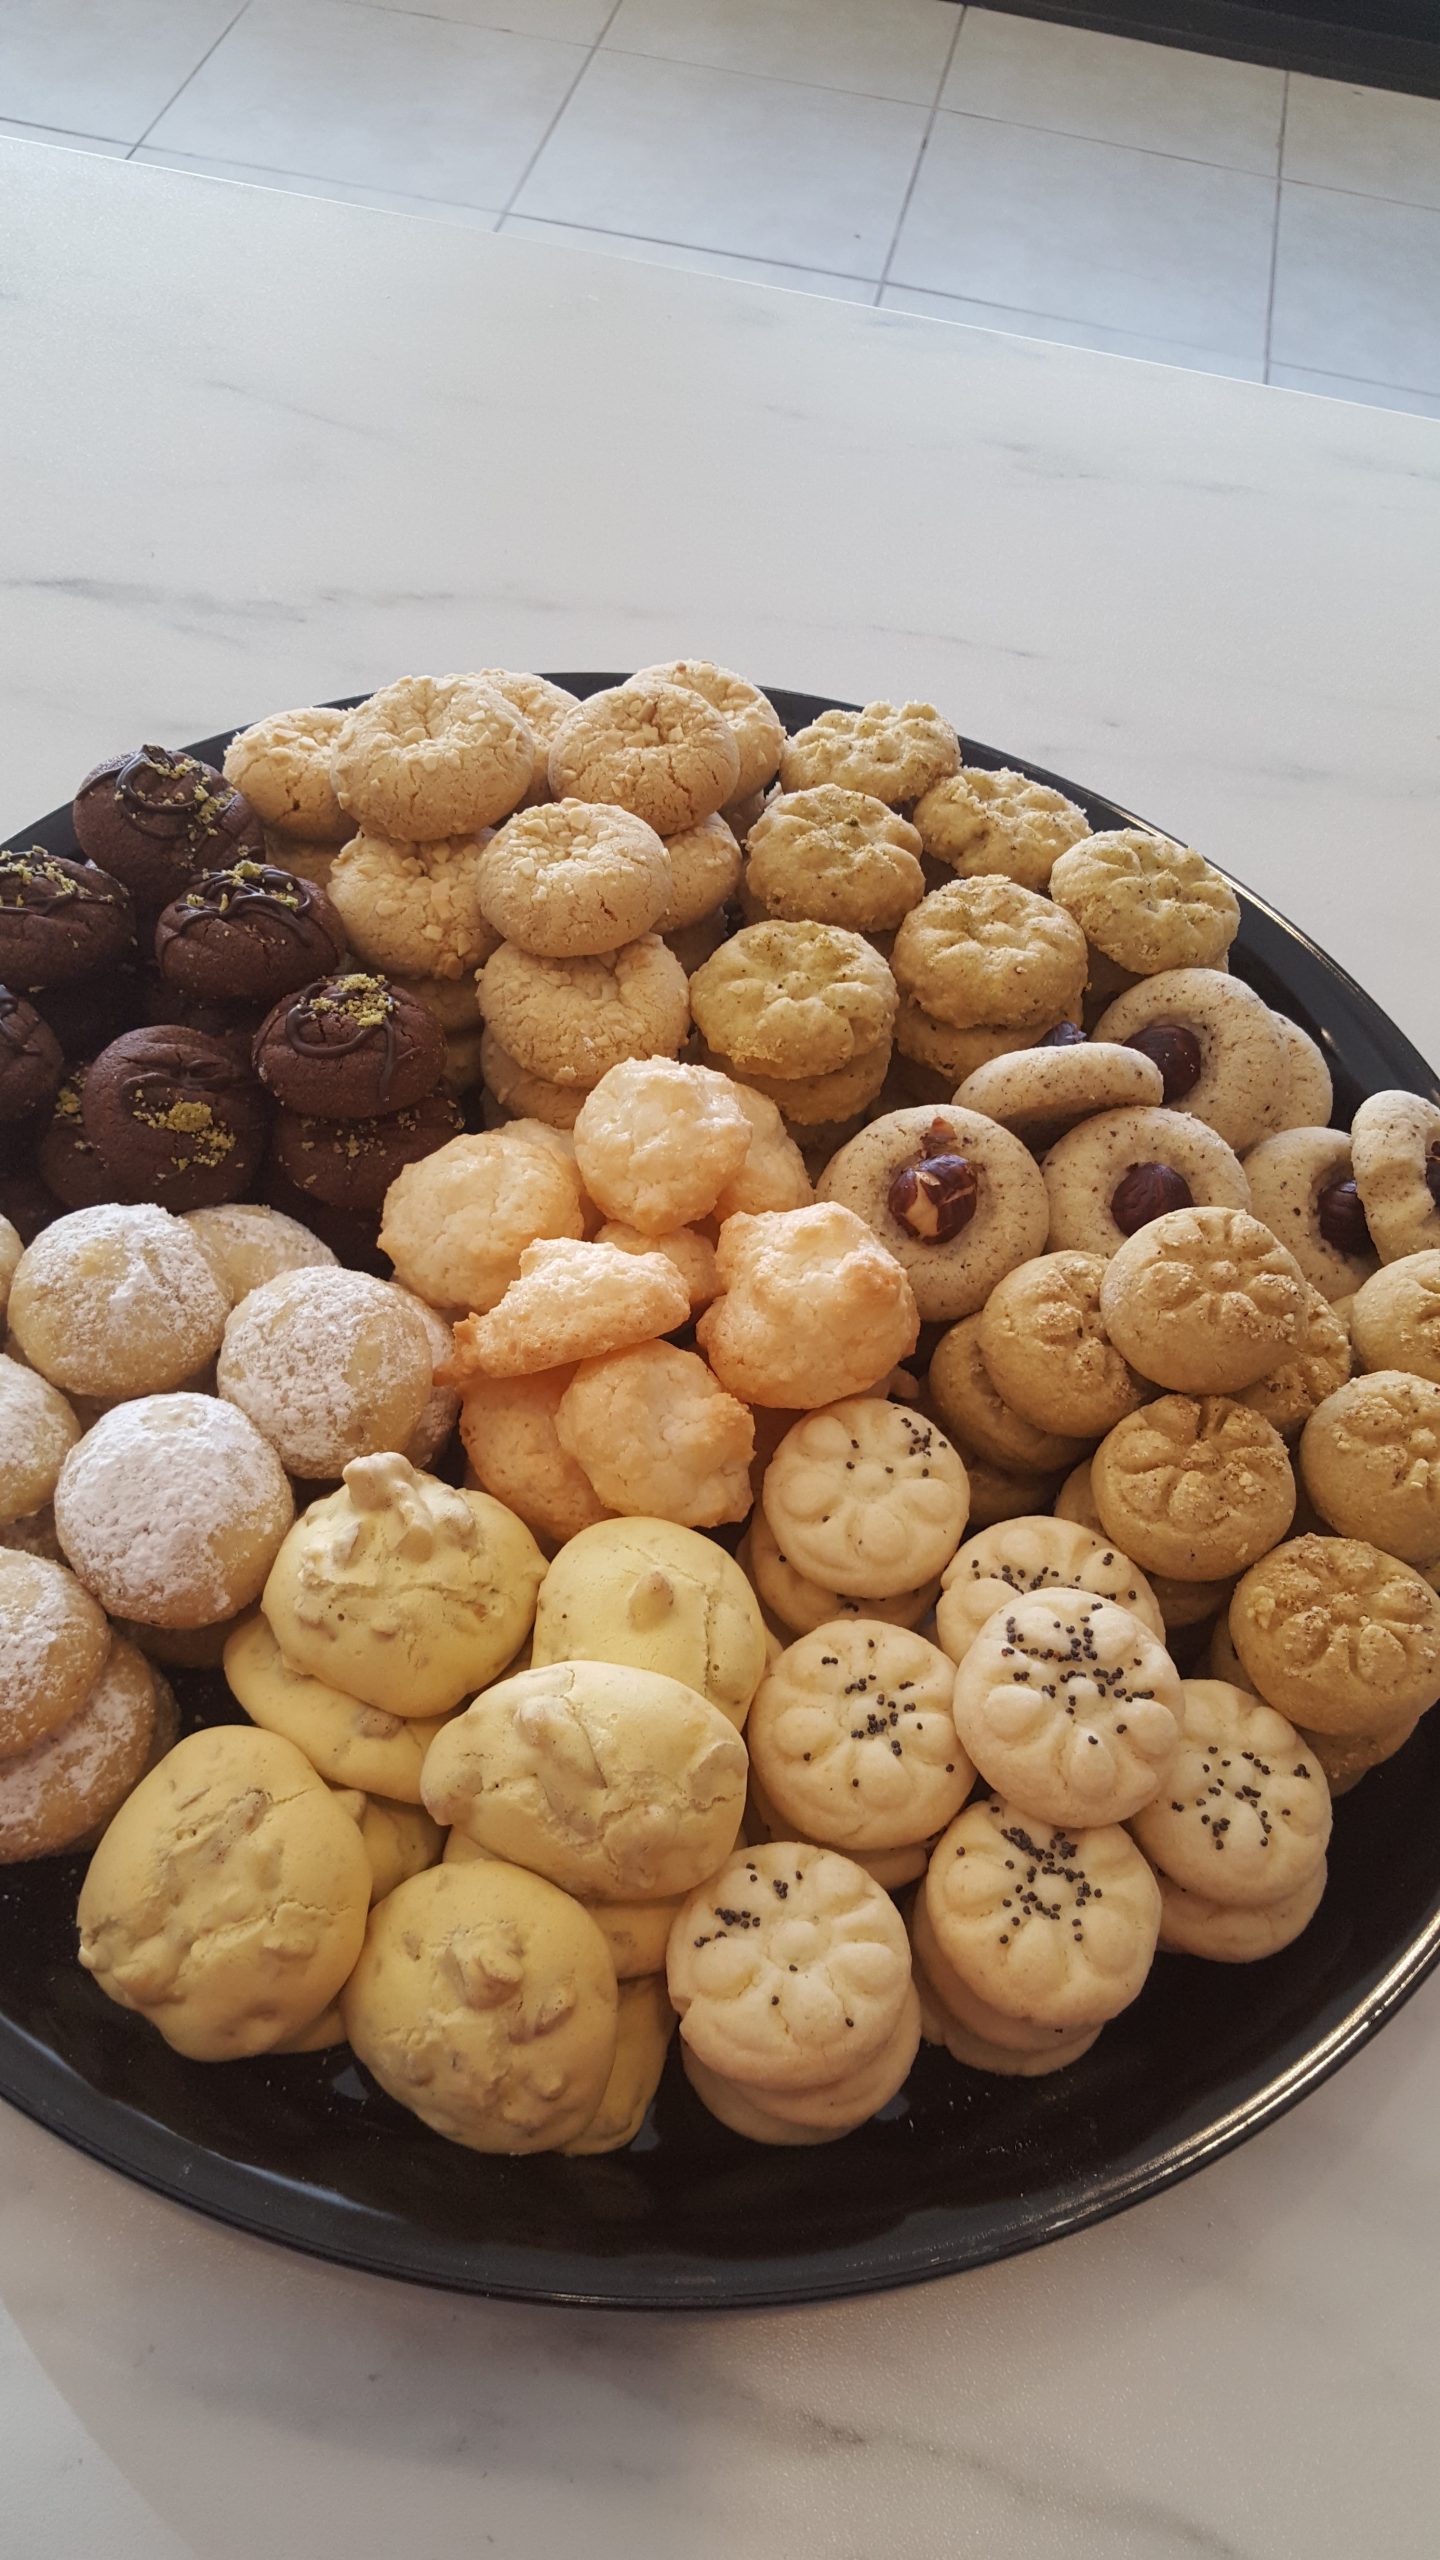 Cookies-On-A-Platter-Bakery